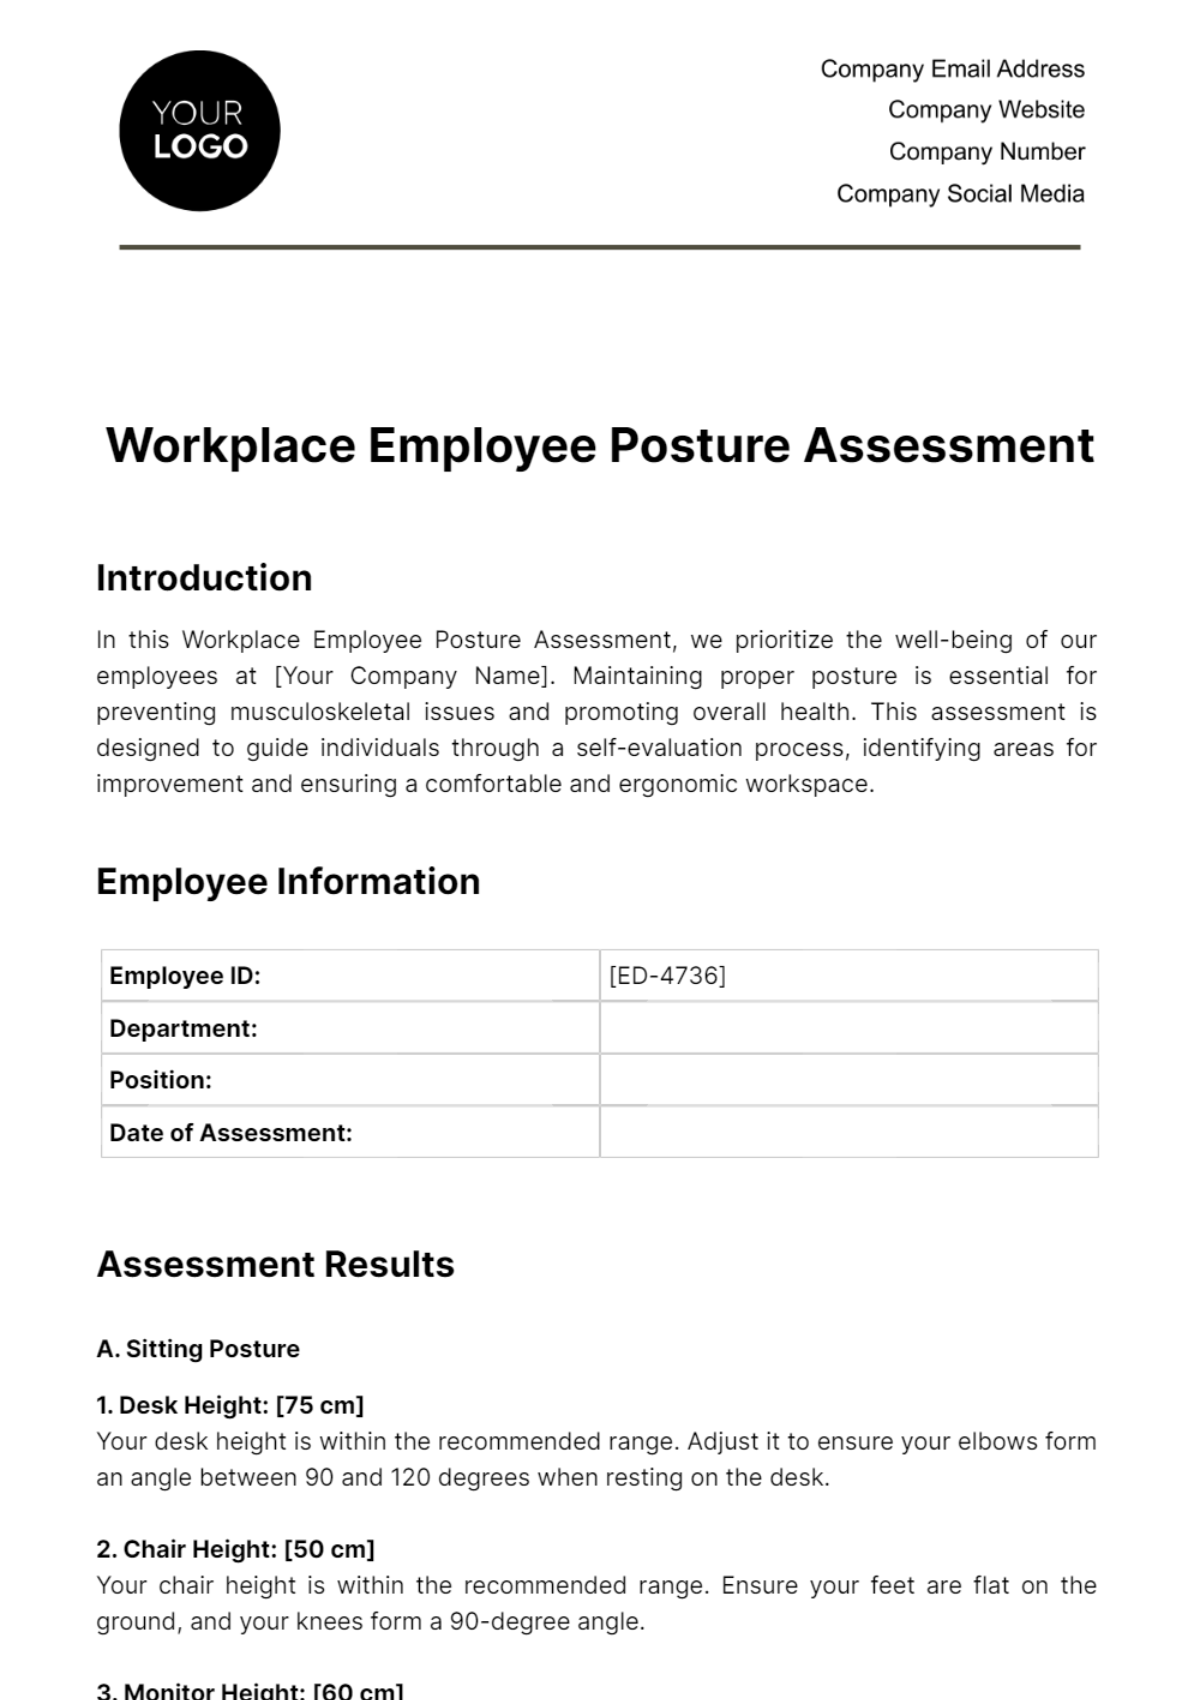 Workplace Employee Posture Assessment Template